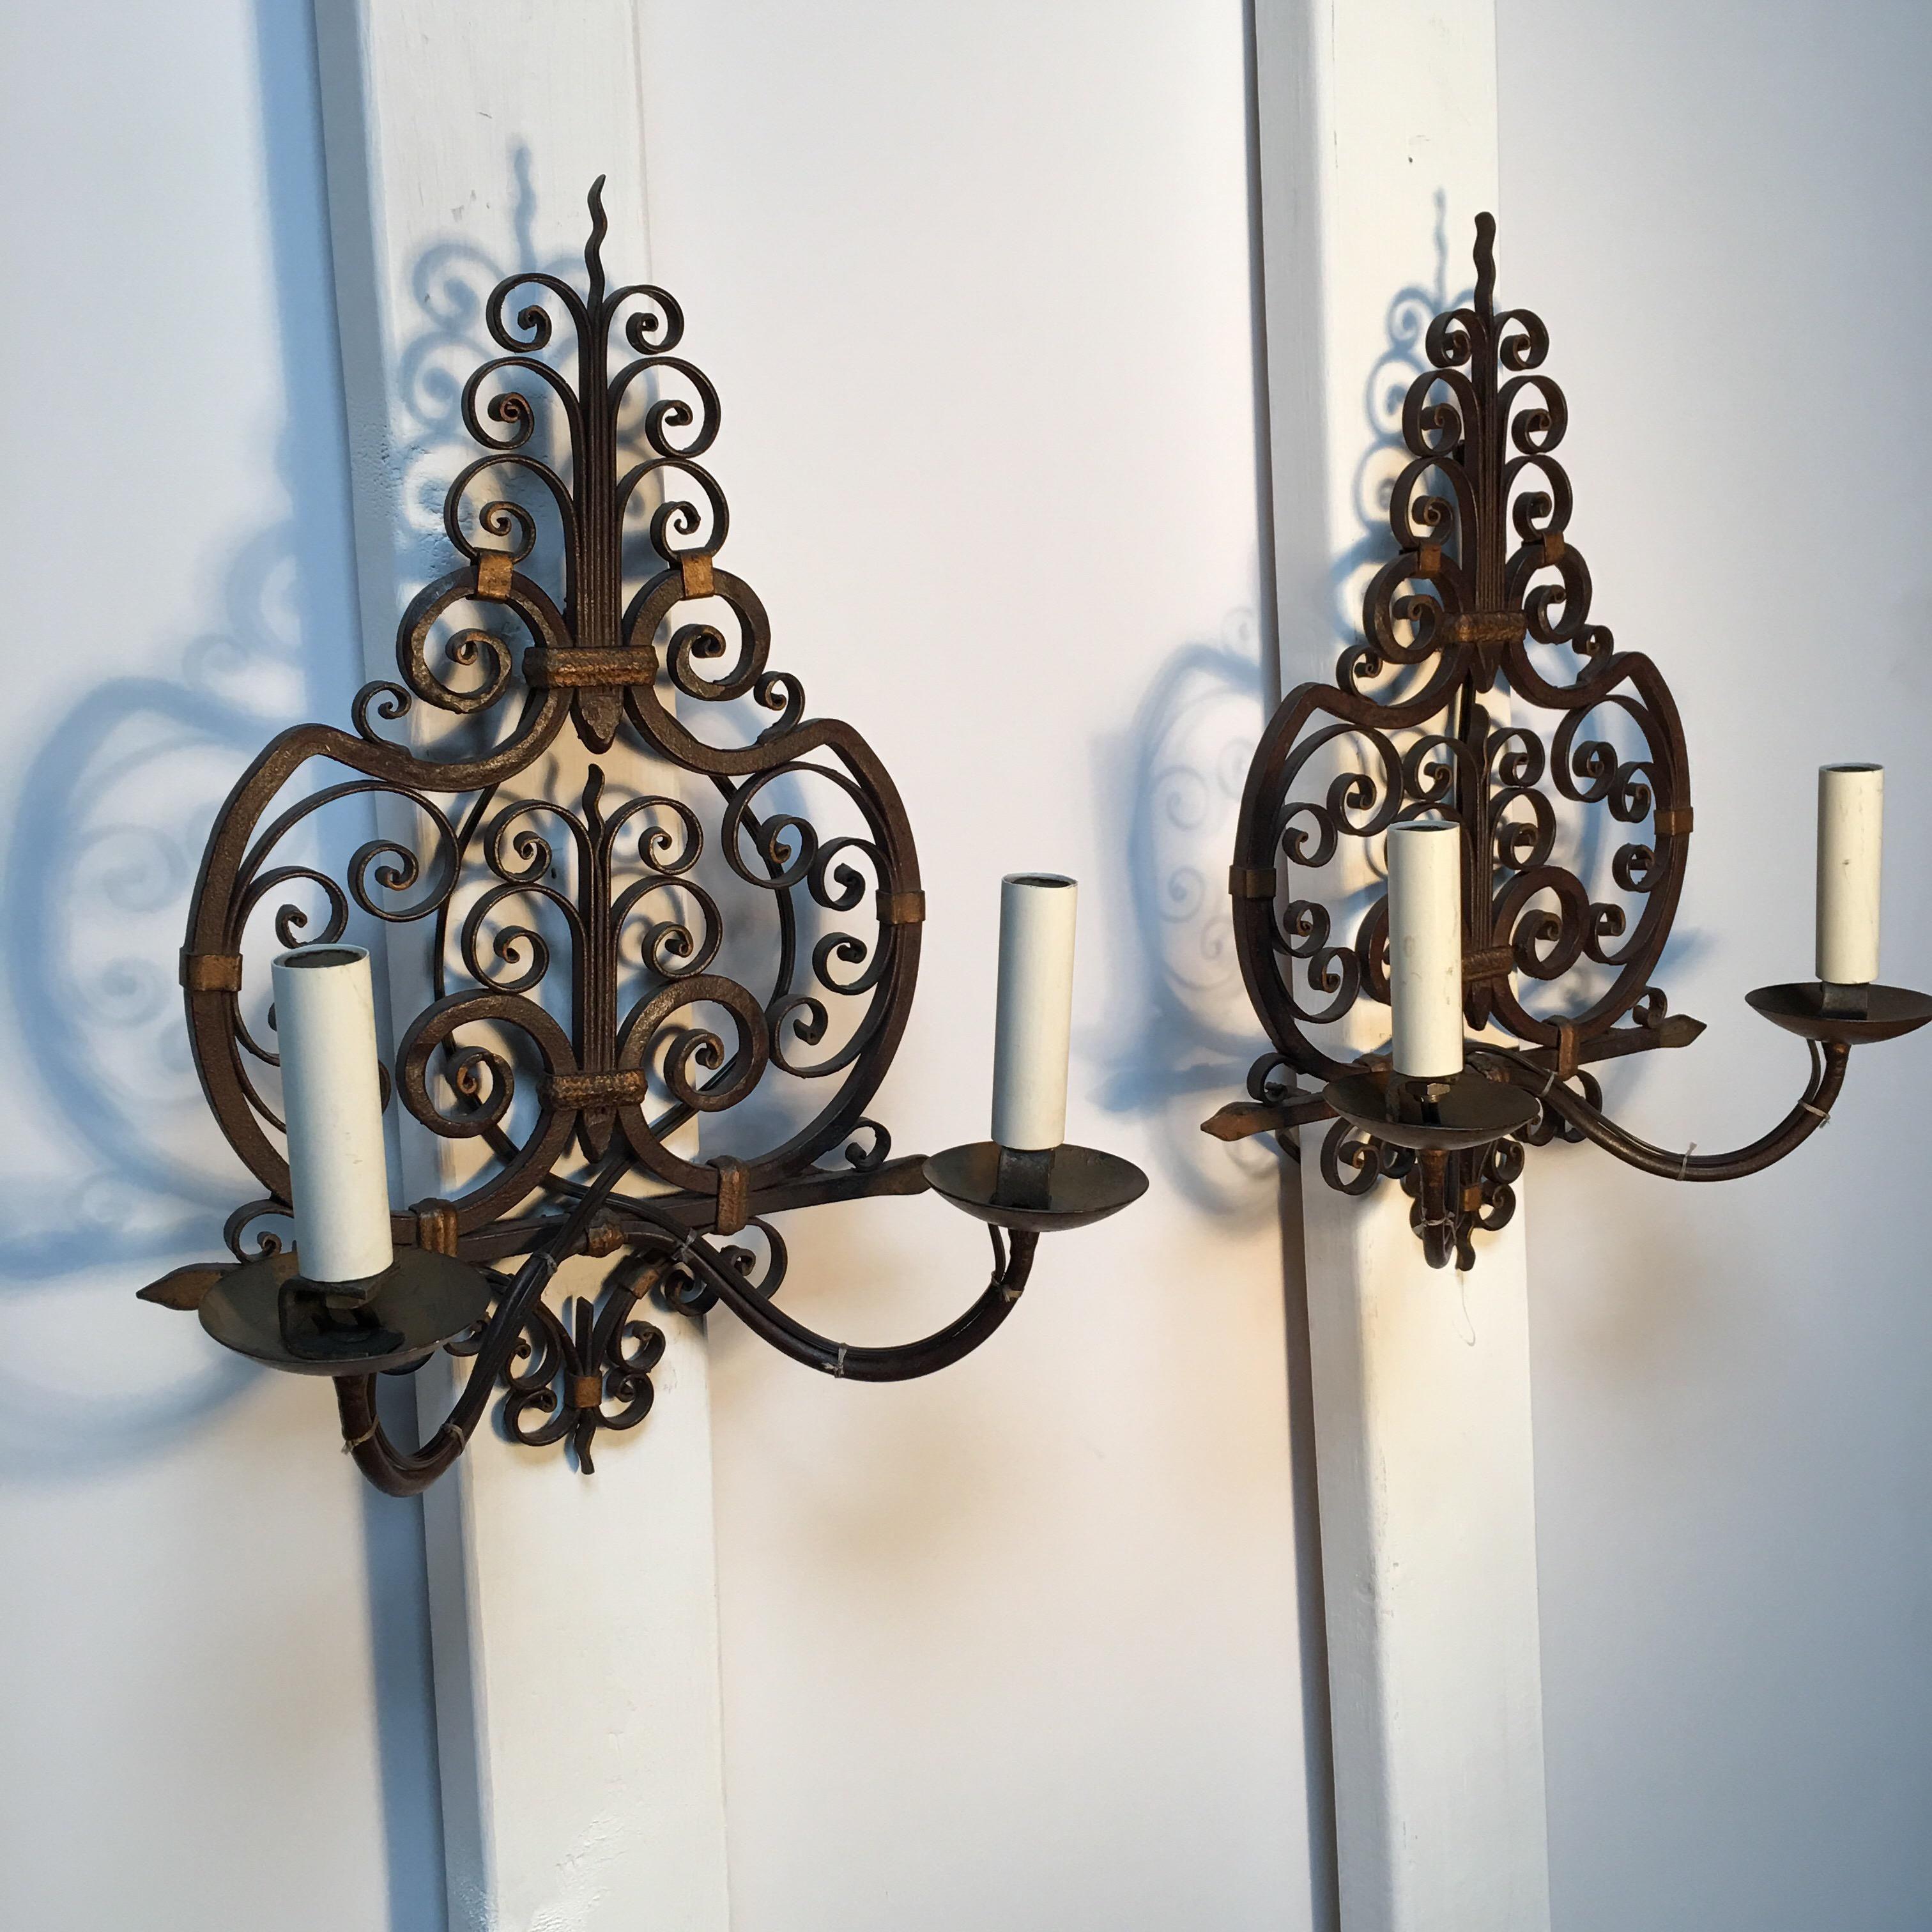 A pair of French forged iron wall sconces.